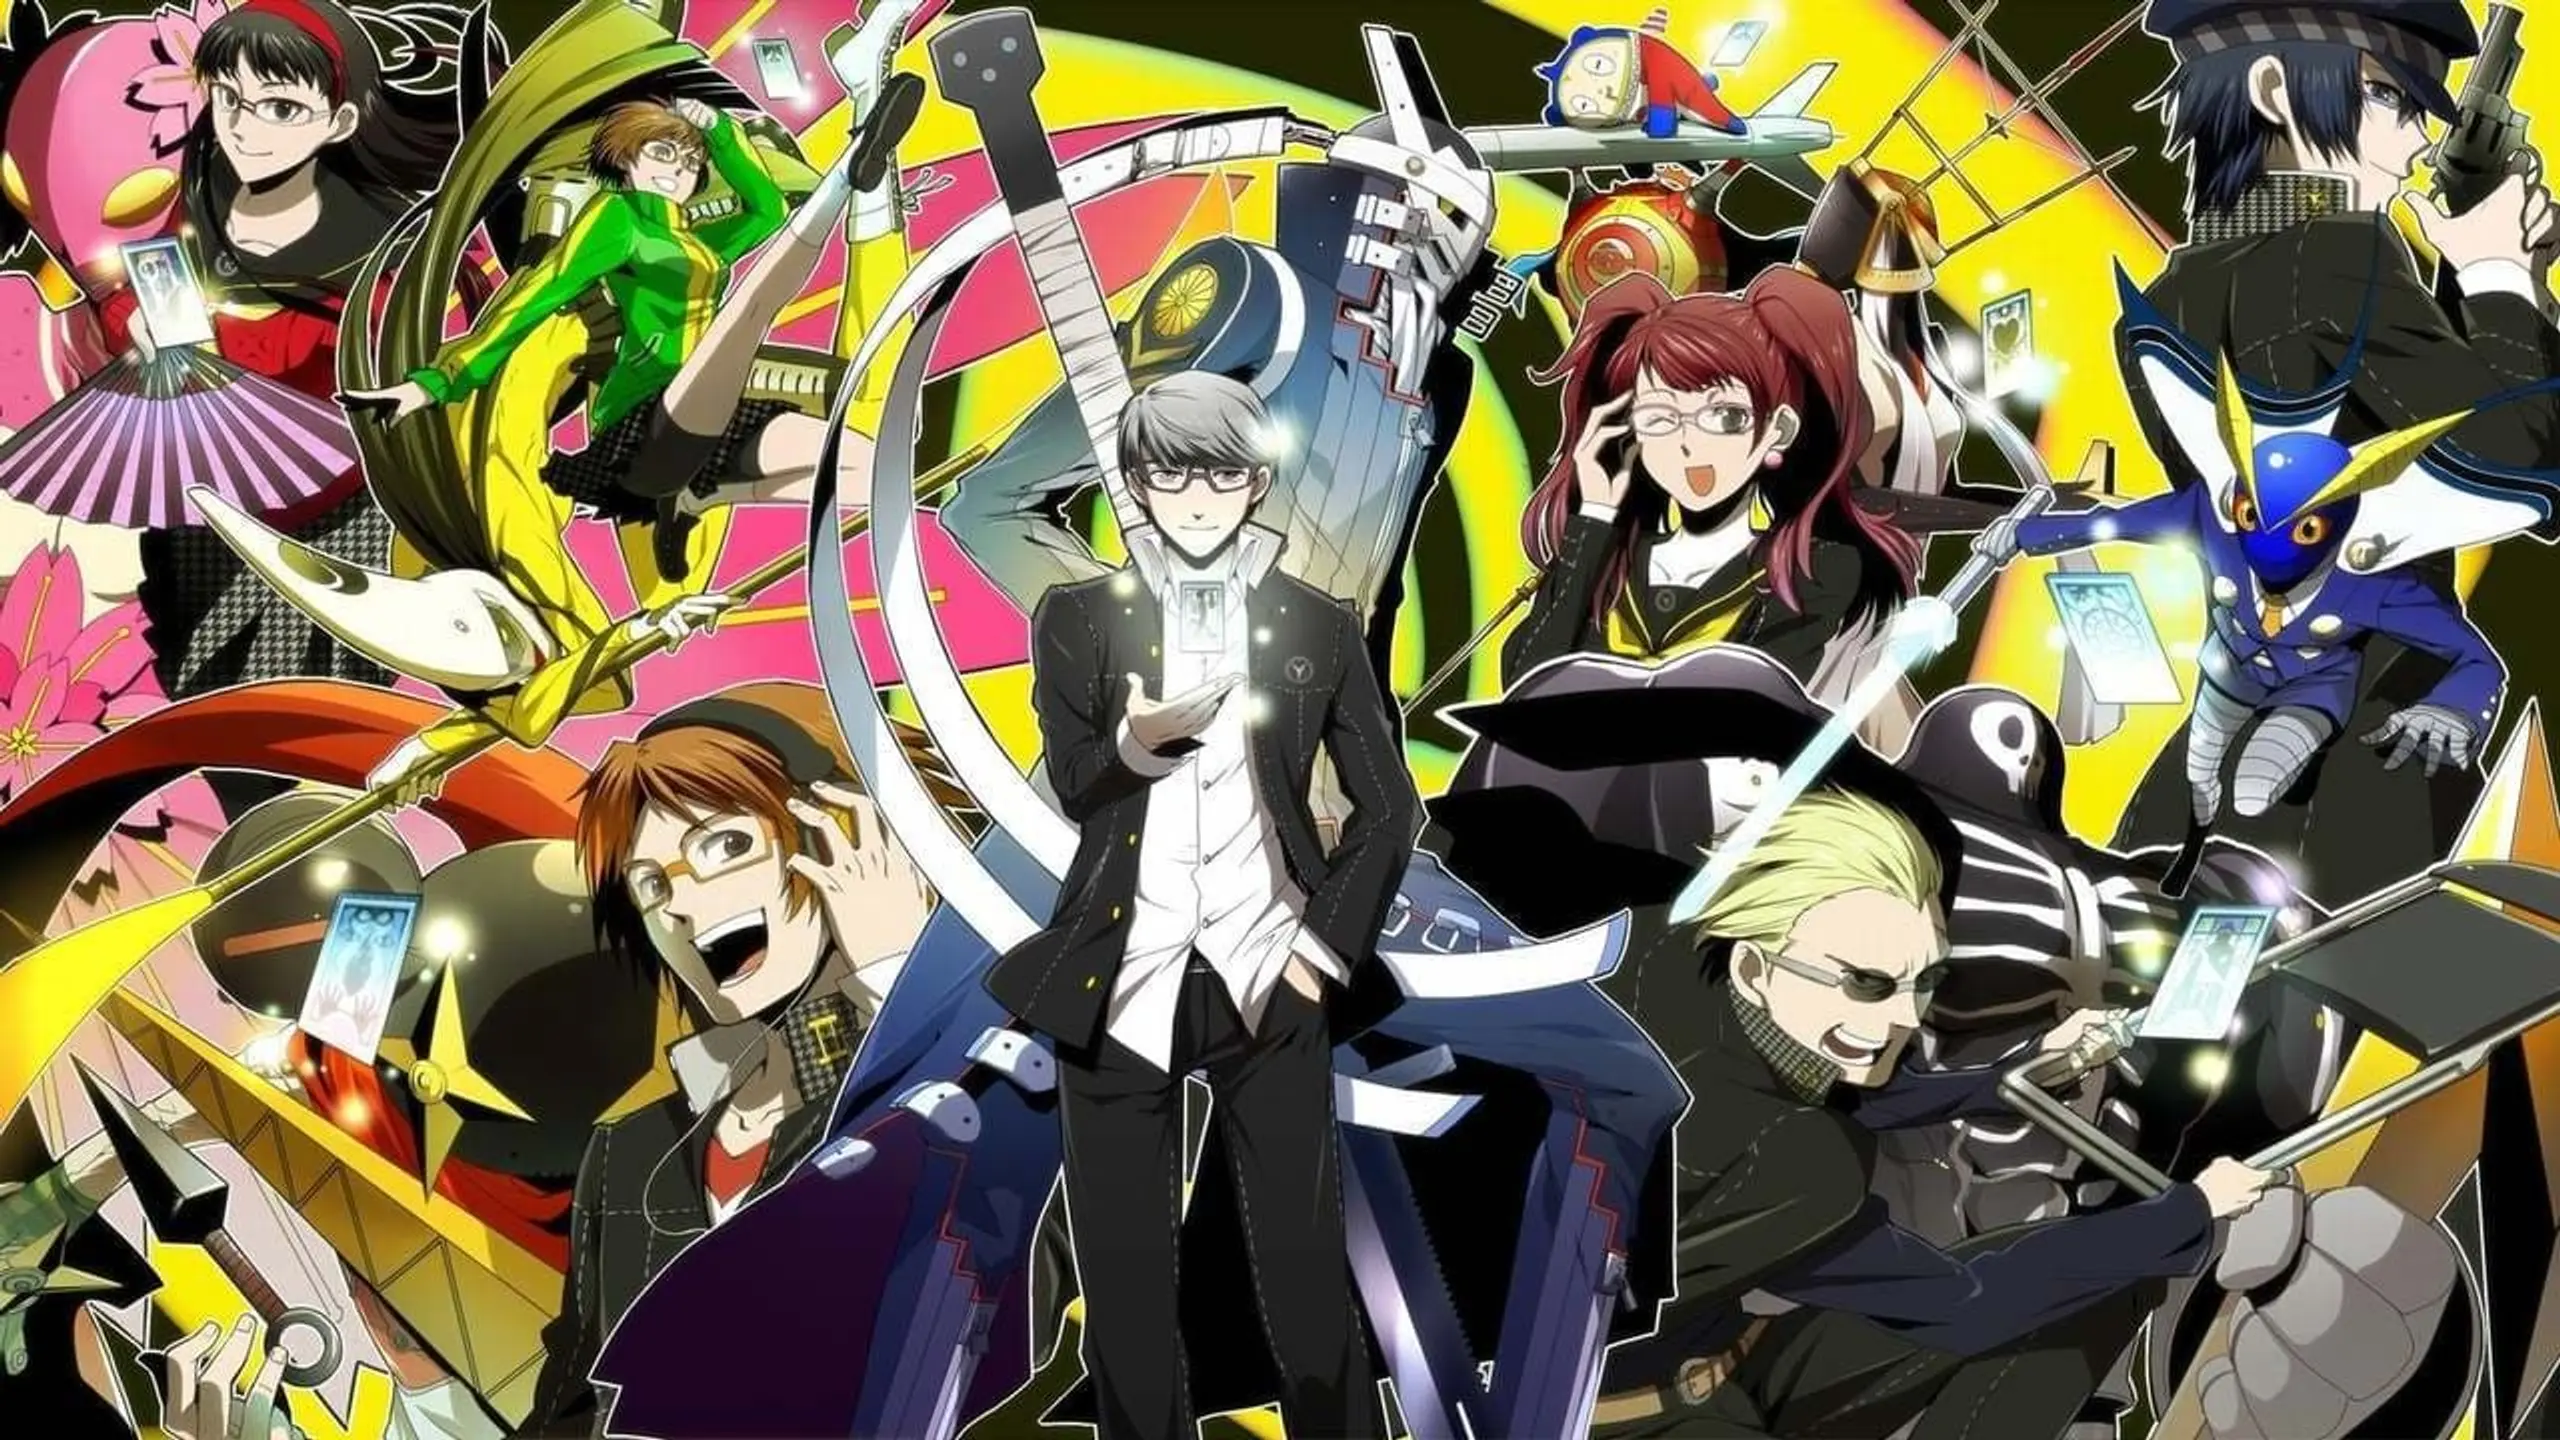 Persona 4 the Animation -the Factor of Hope-